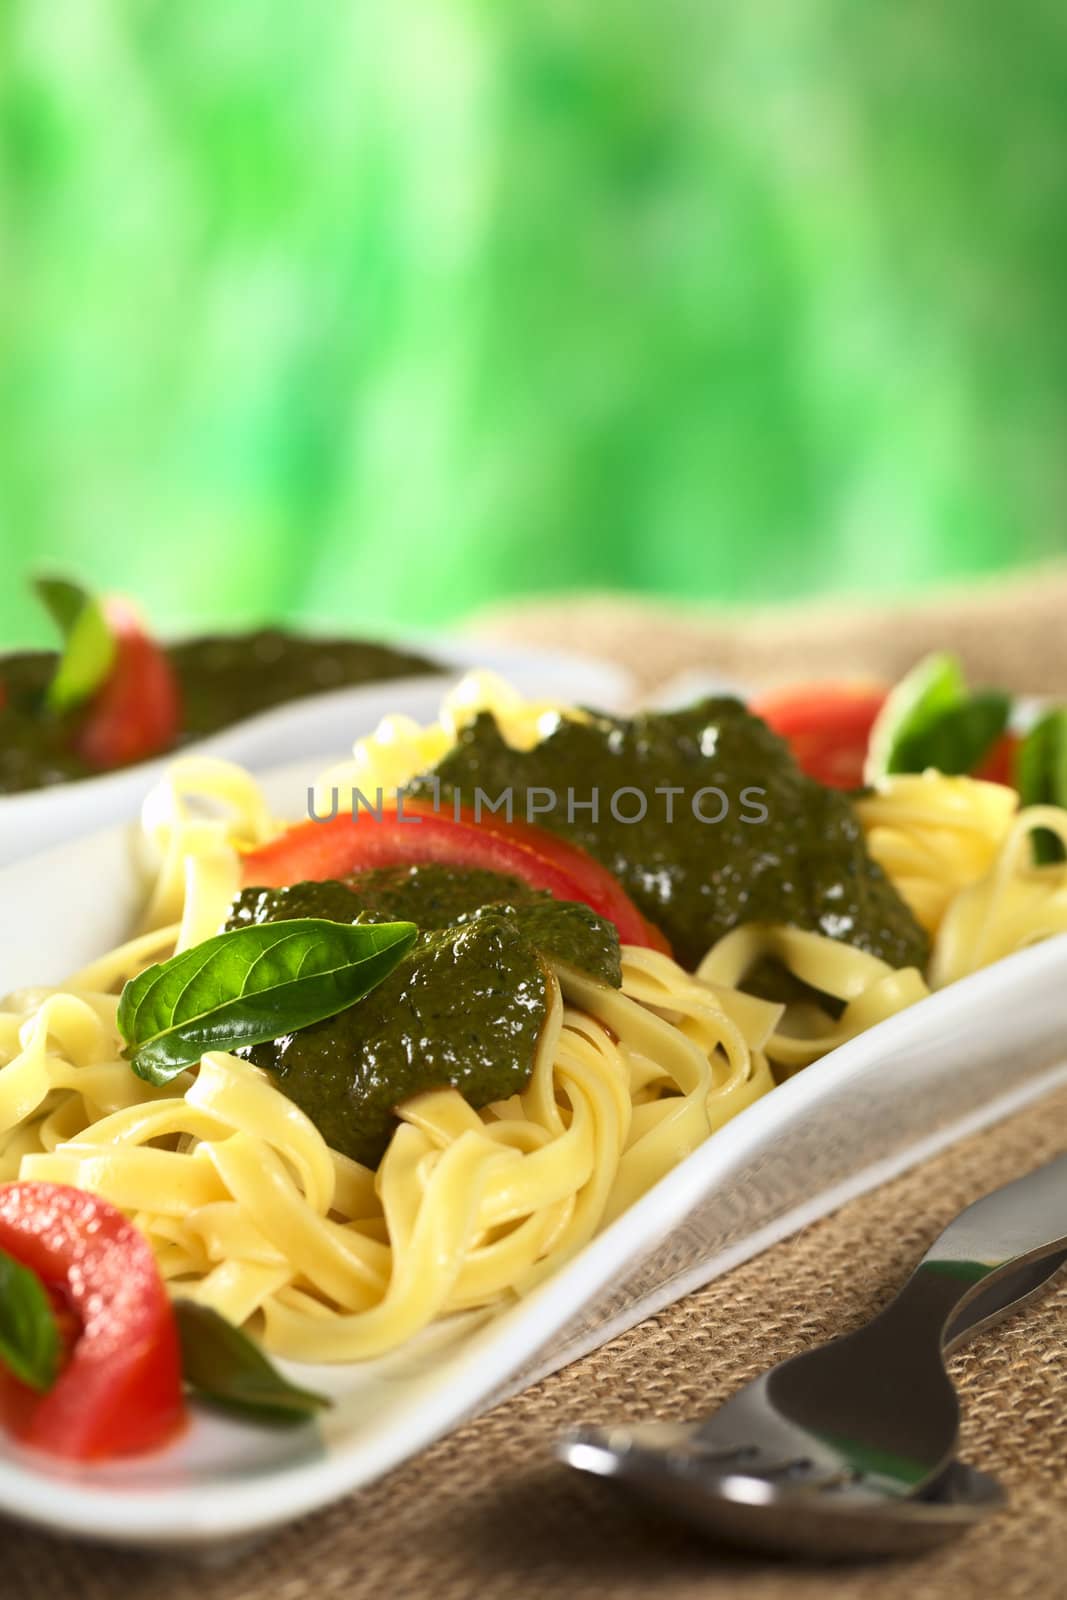 Yellow tagliatelle with fresh pesto made of basil and garlic and garnished with tomato slices and basil leaves (Selective Focus, Focus on the basil leaf on the front of the pesto)